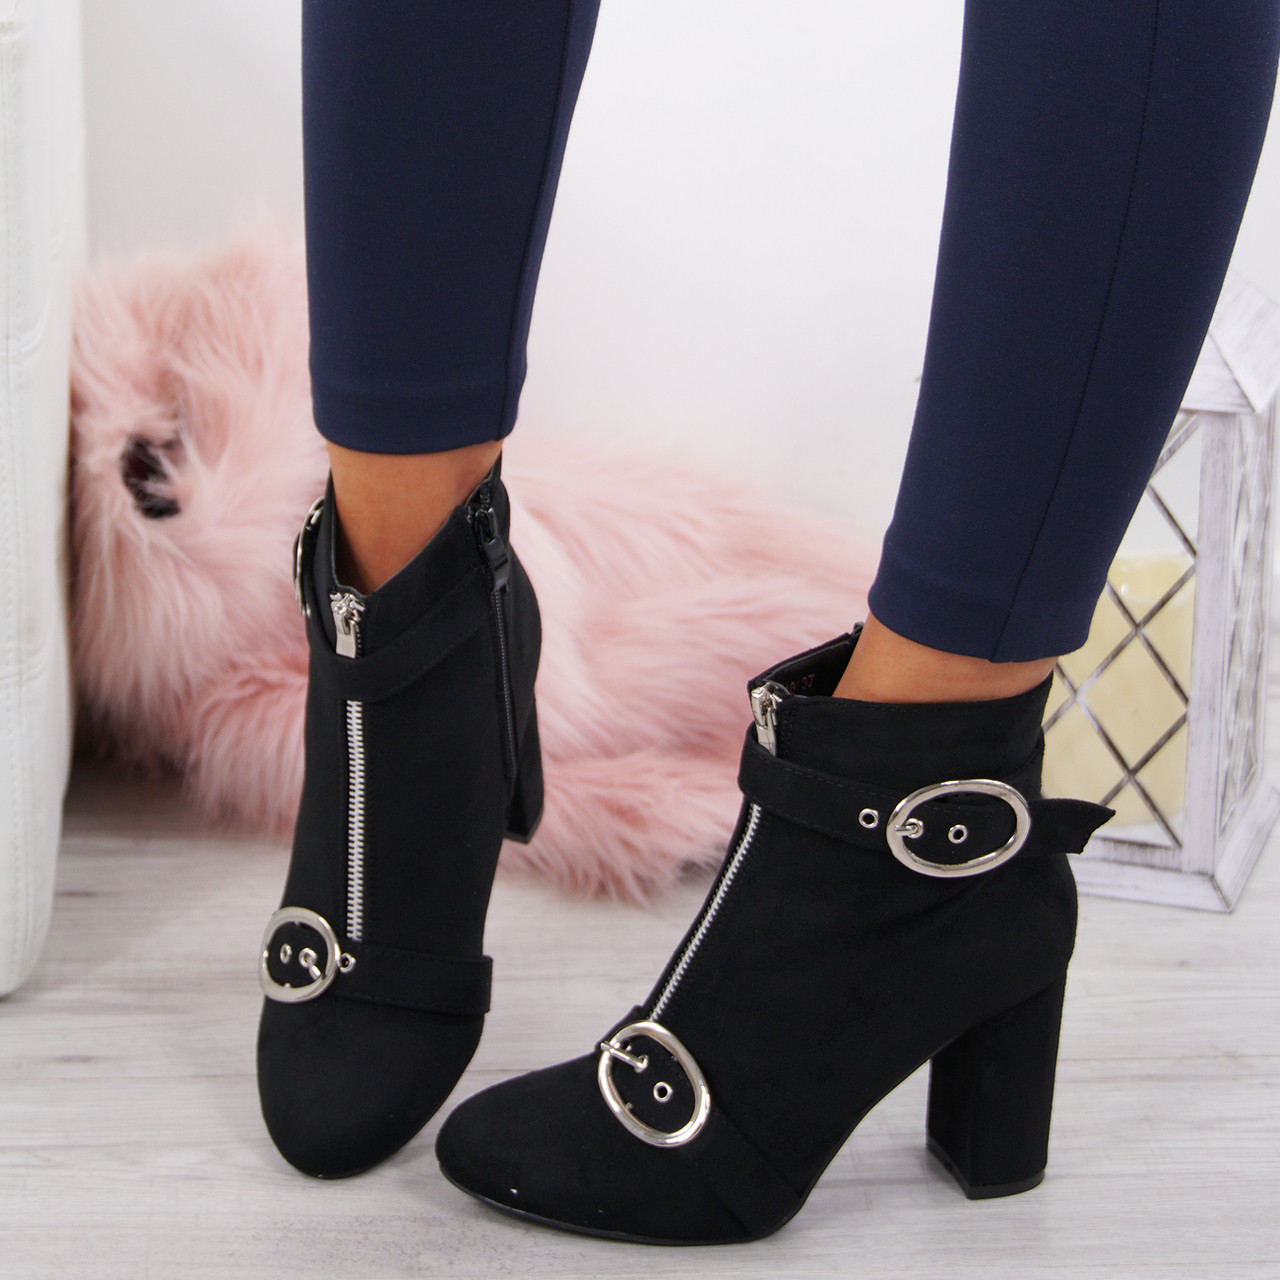 black ankle boots uk